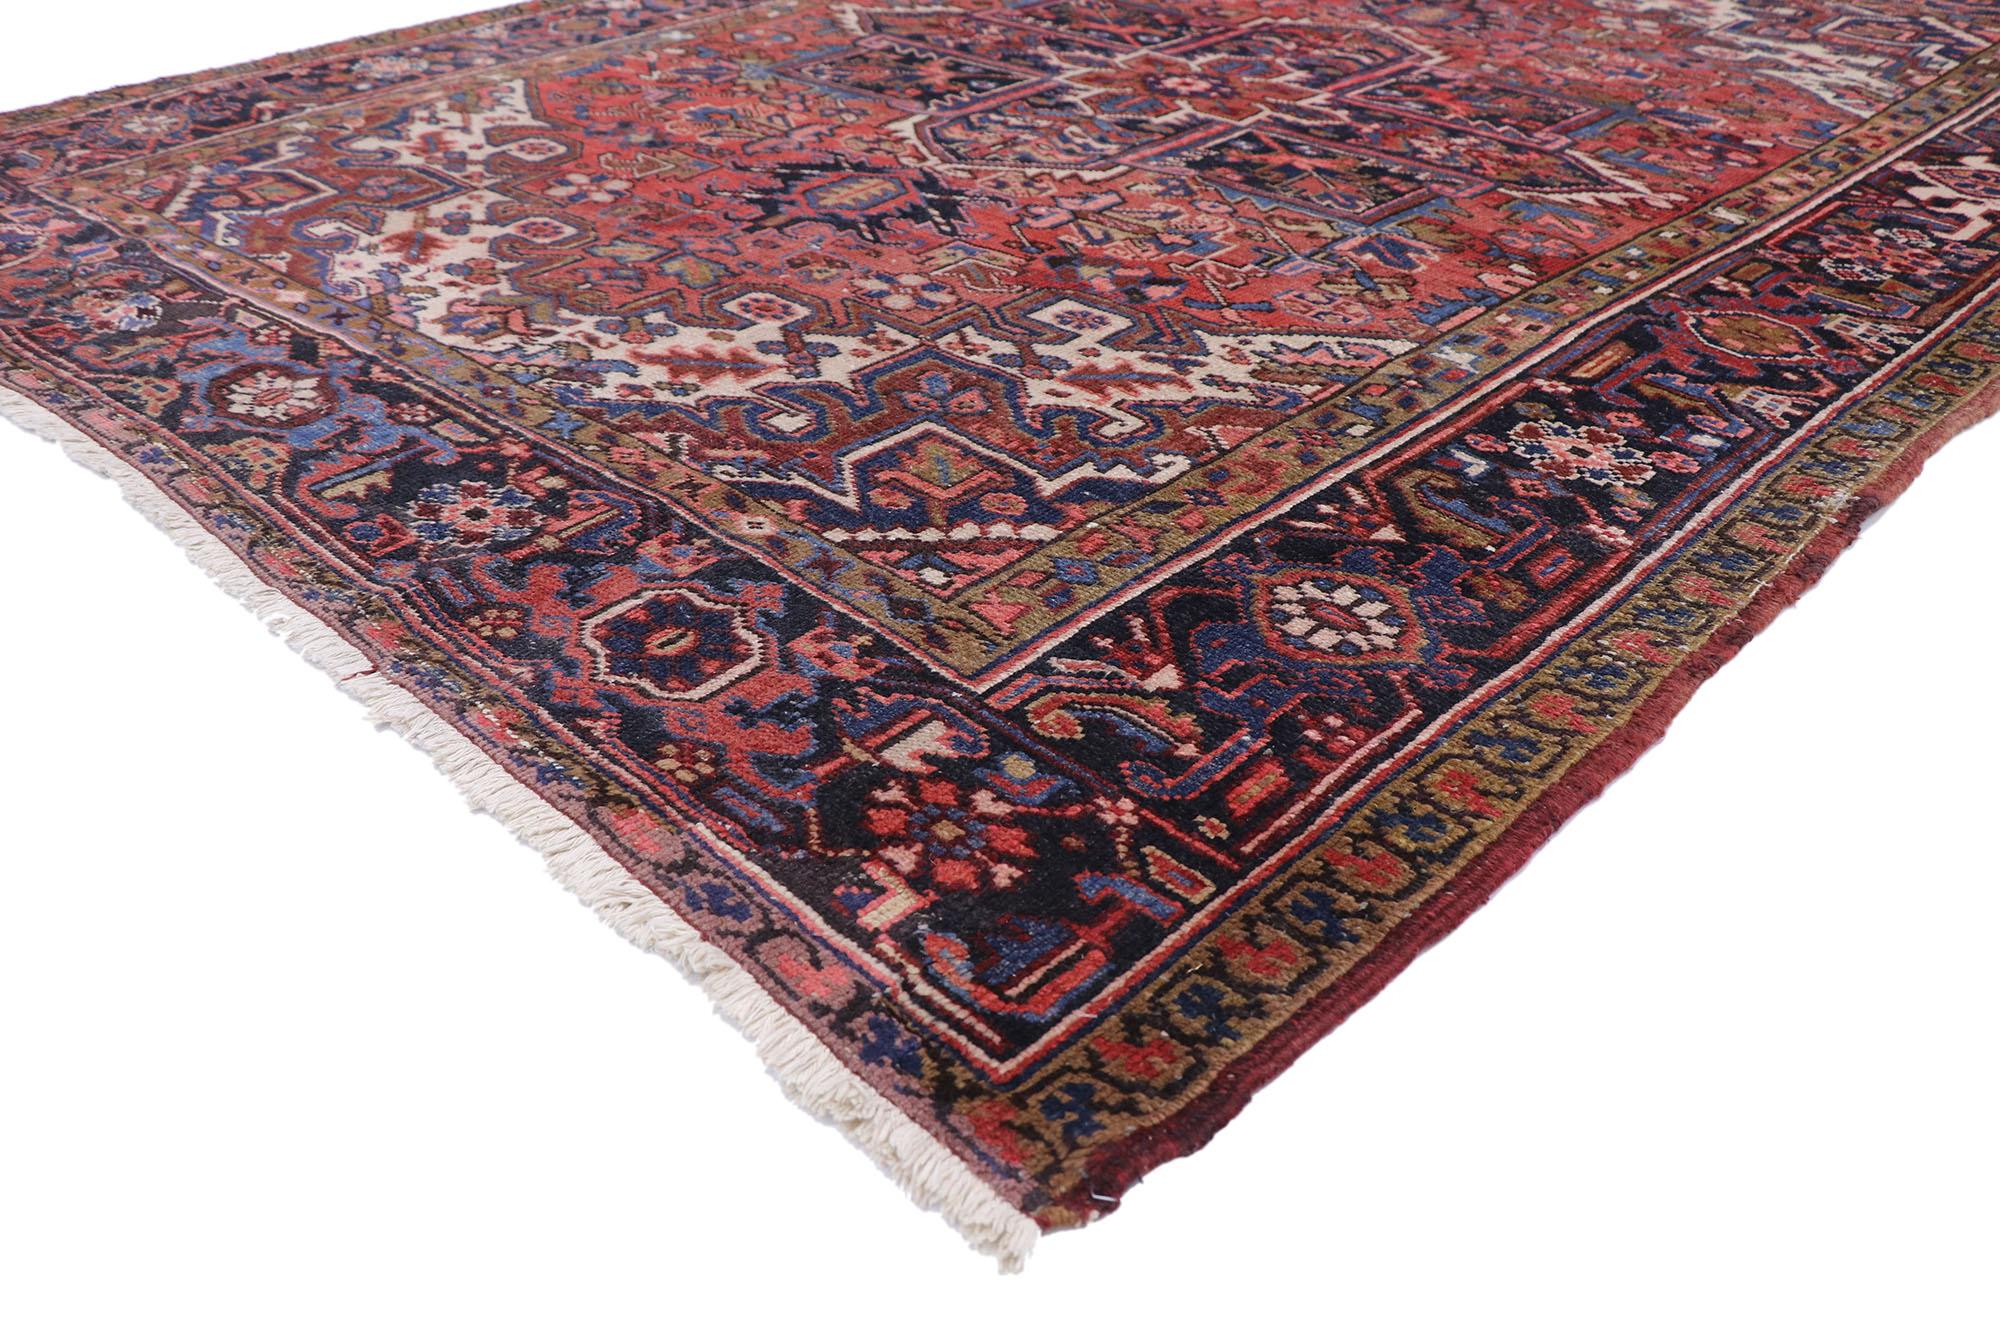 75862, Vintage Persian Heriz rug with Federal and American Colonial style. Traditional and regal with saturated colors, this vintage Persian Heriz area rug with American Colonial and Federal style is comprised of a prominent octagram cruciform